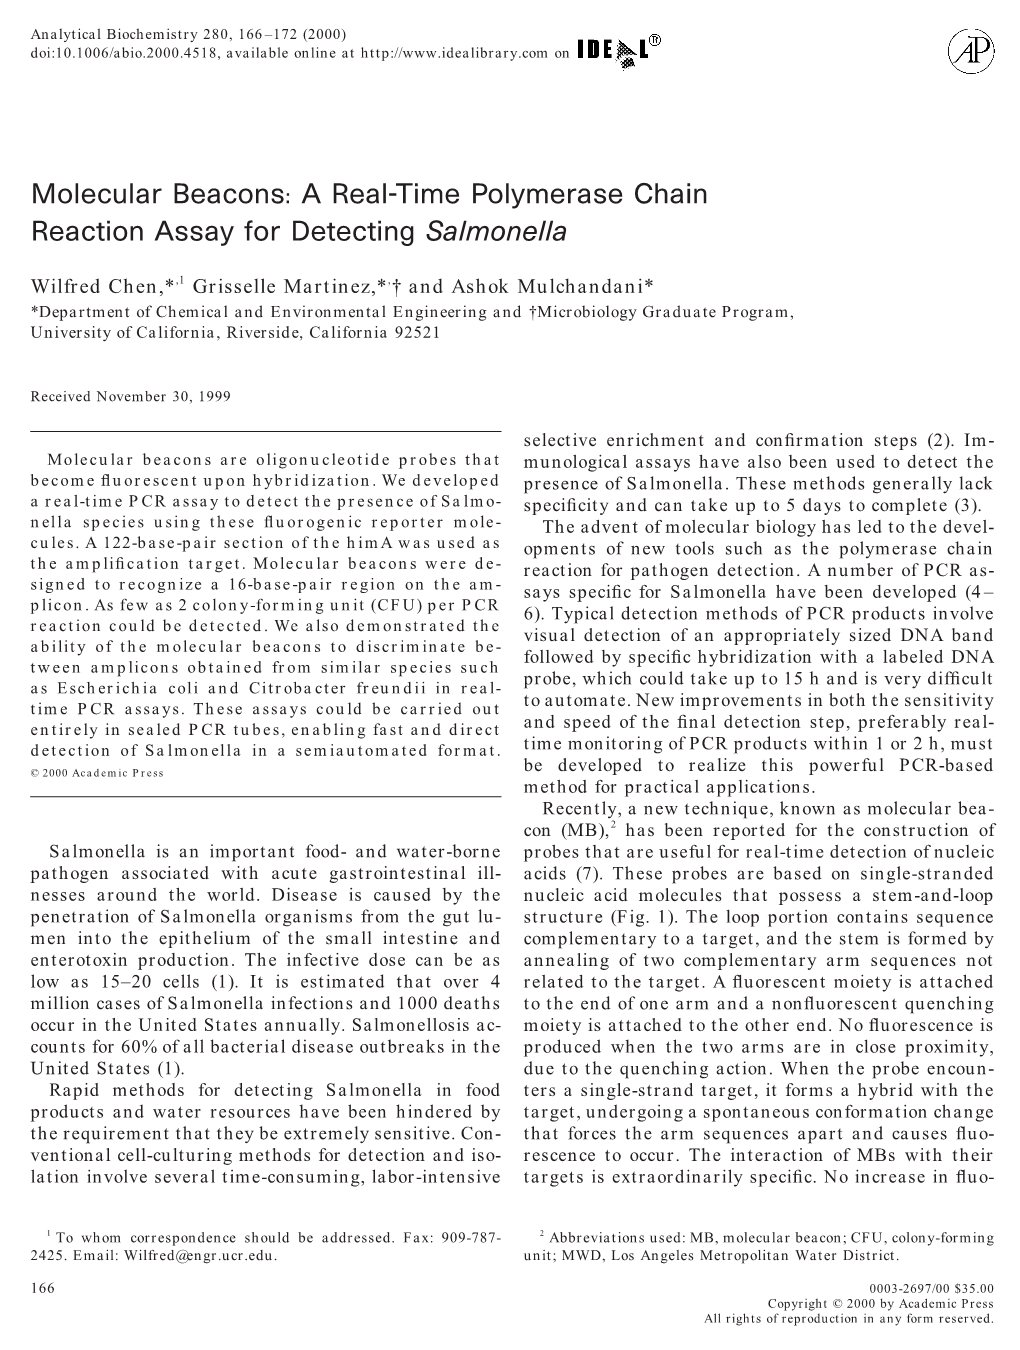 Molecular Beacons: a Real-Time Polymerase Chain Reaction Assay for Detecting Salmonella